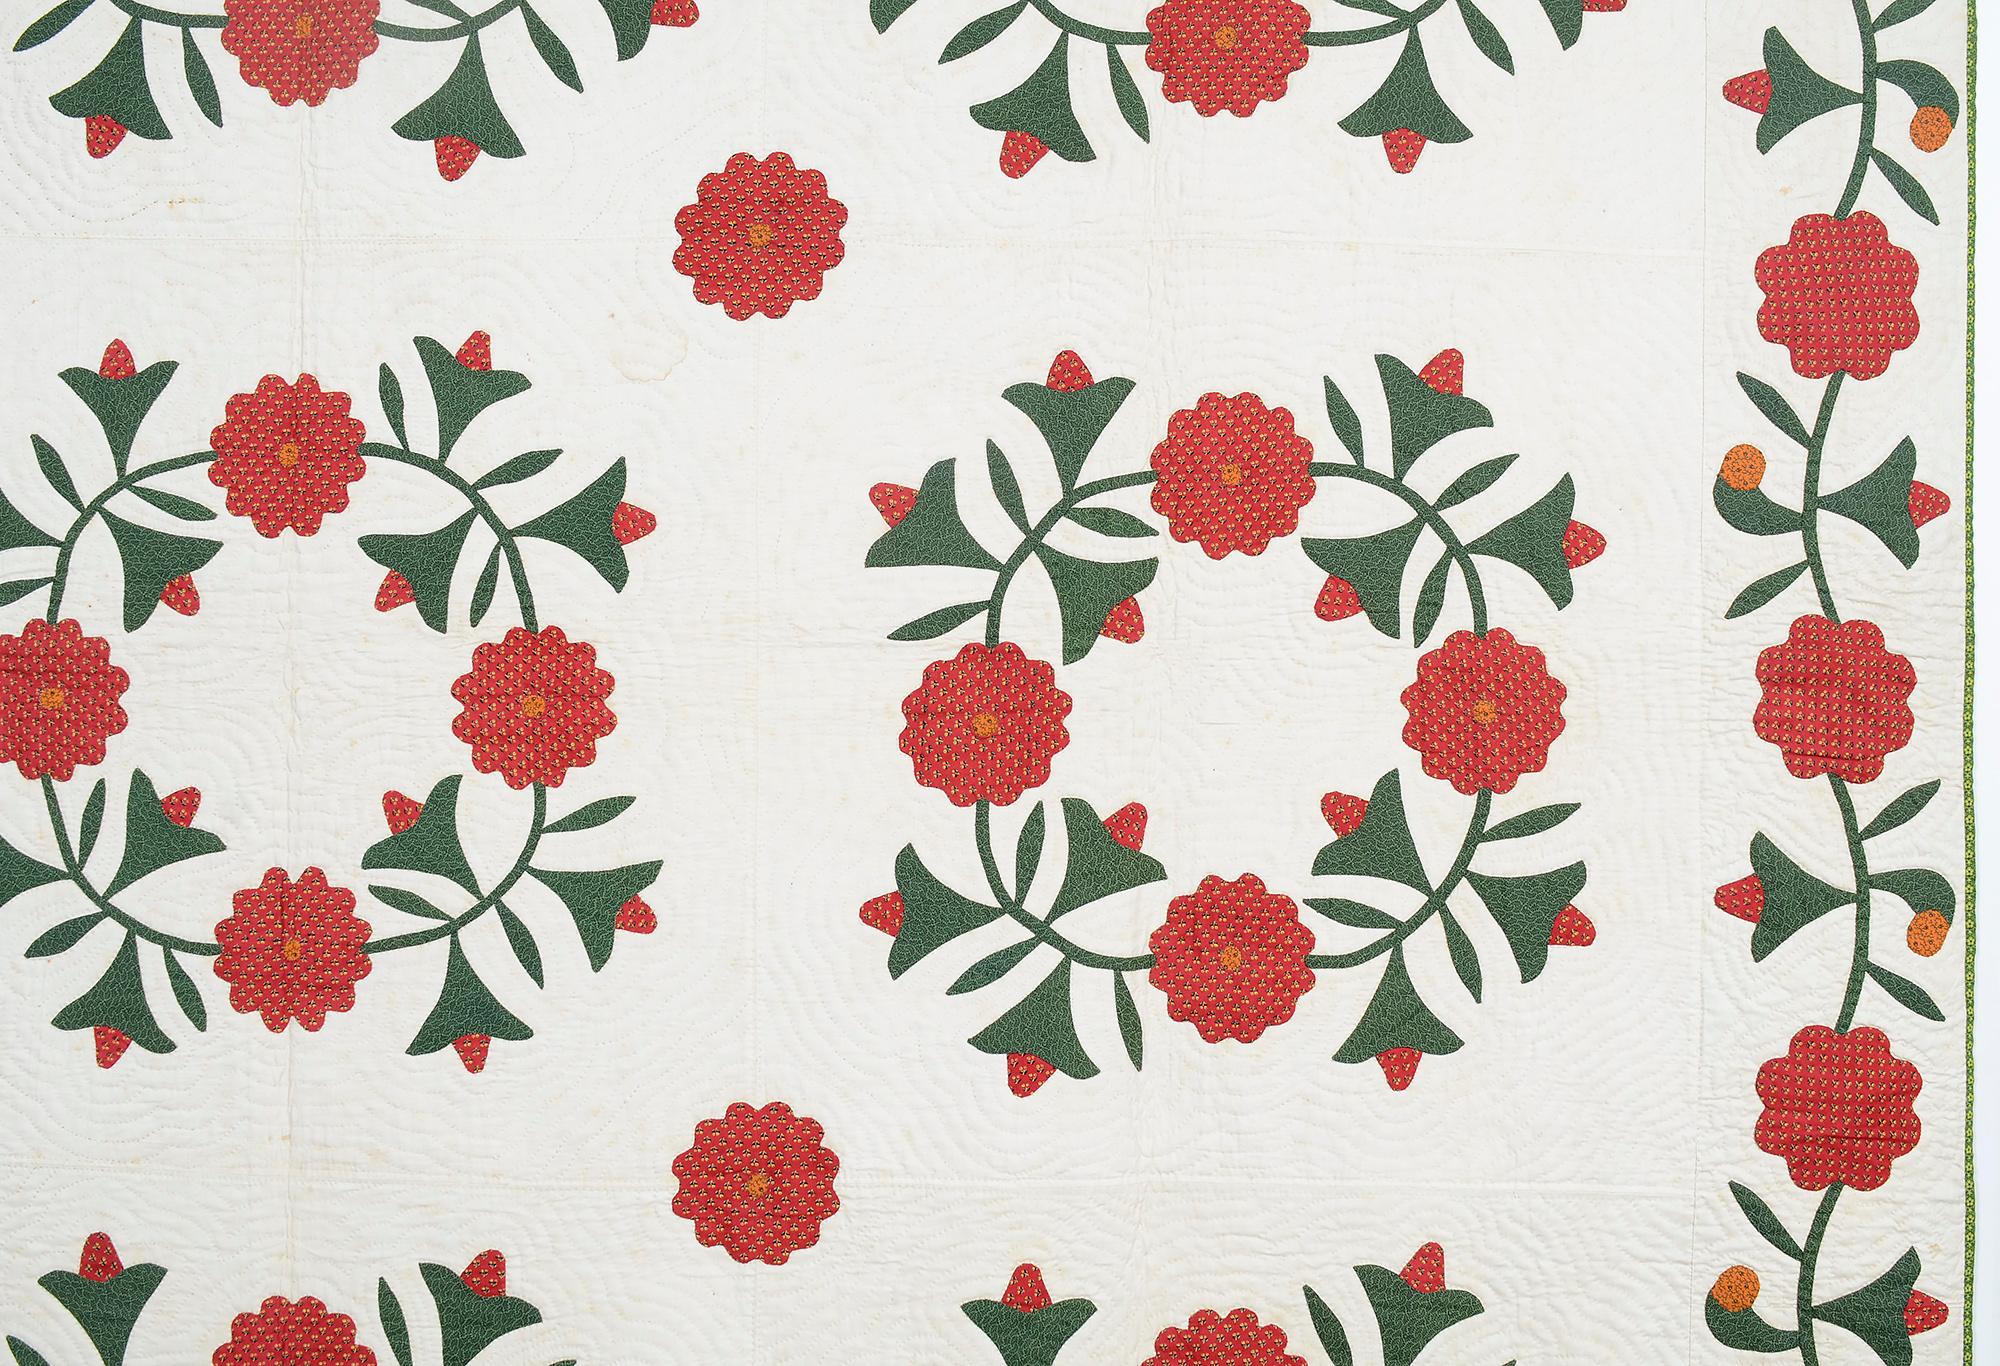 American Roses and Bells Quilt For Sale